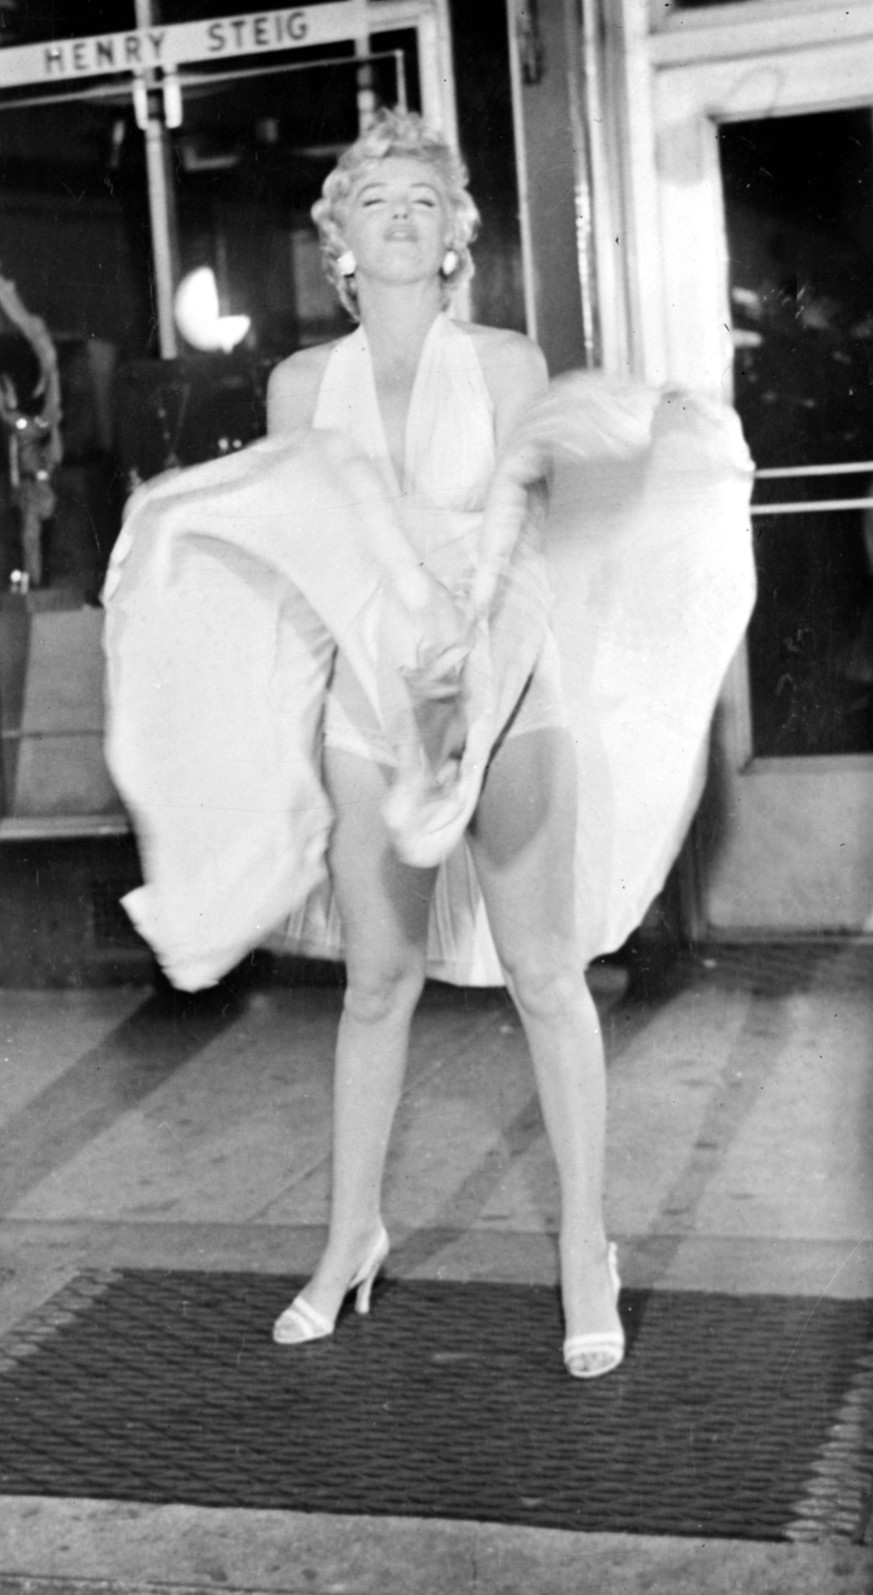 Bildnummer: 60231338 Datum: 01.01.1900 Copyright: imago/United Archives International
New York: Making a series of scenes for the new film Seven Year Itch in Downtown Manhattan, New York, Marilyn Monr ...